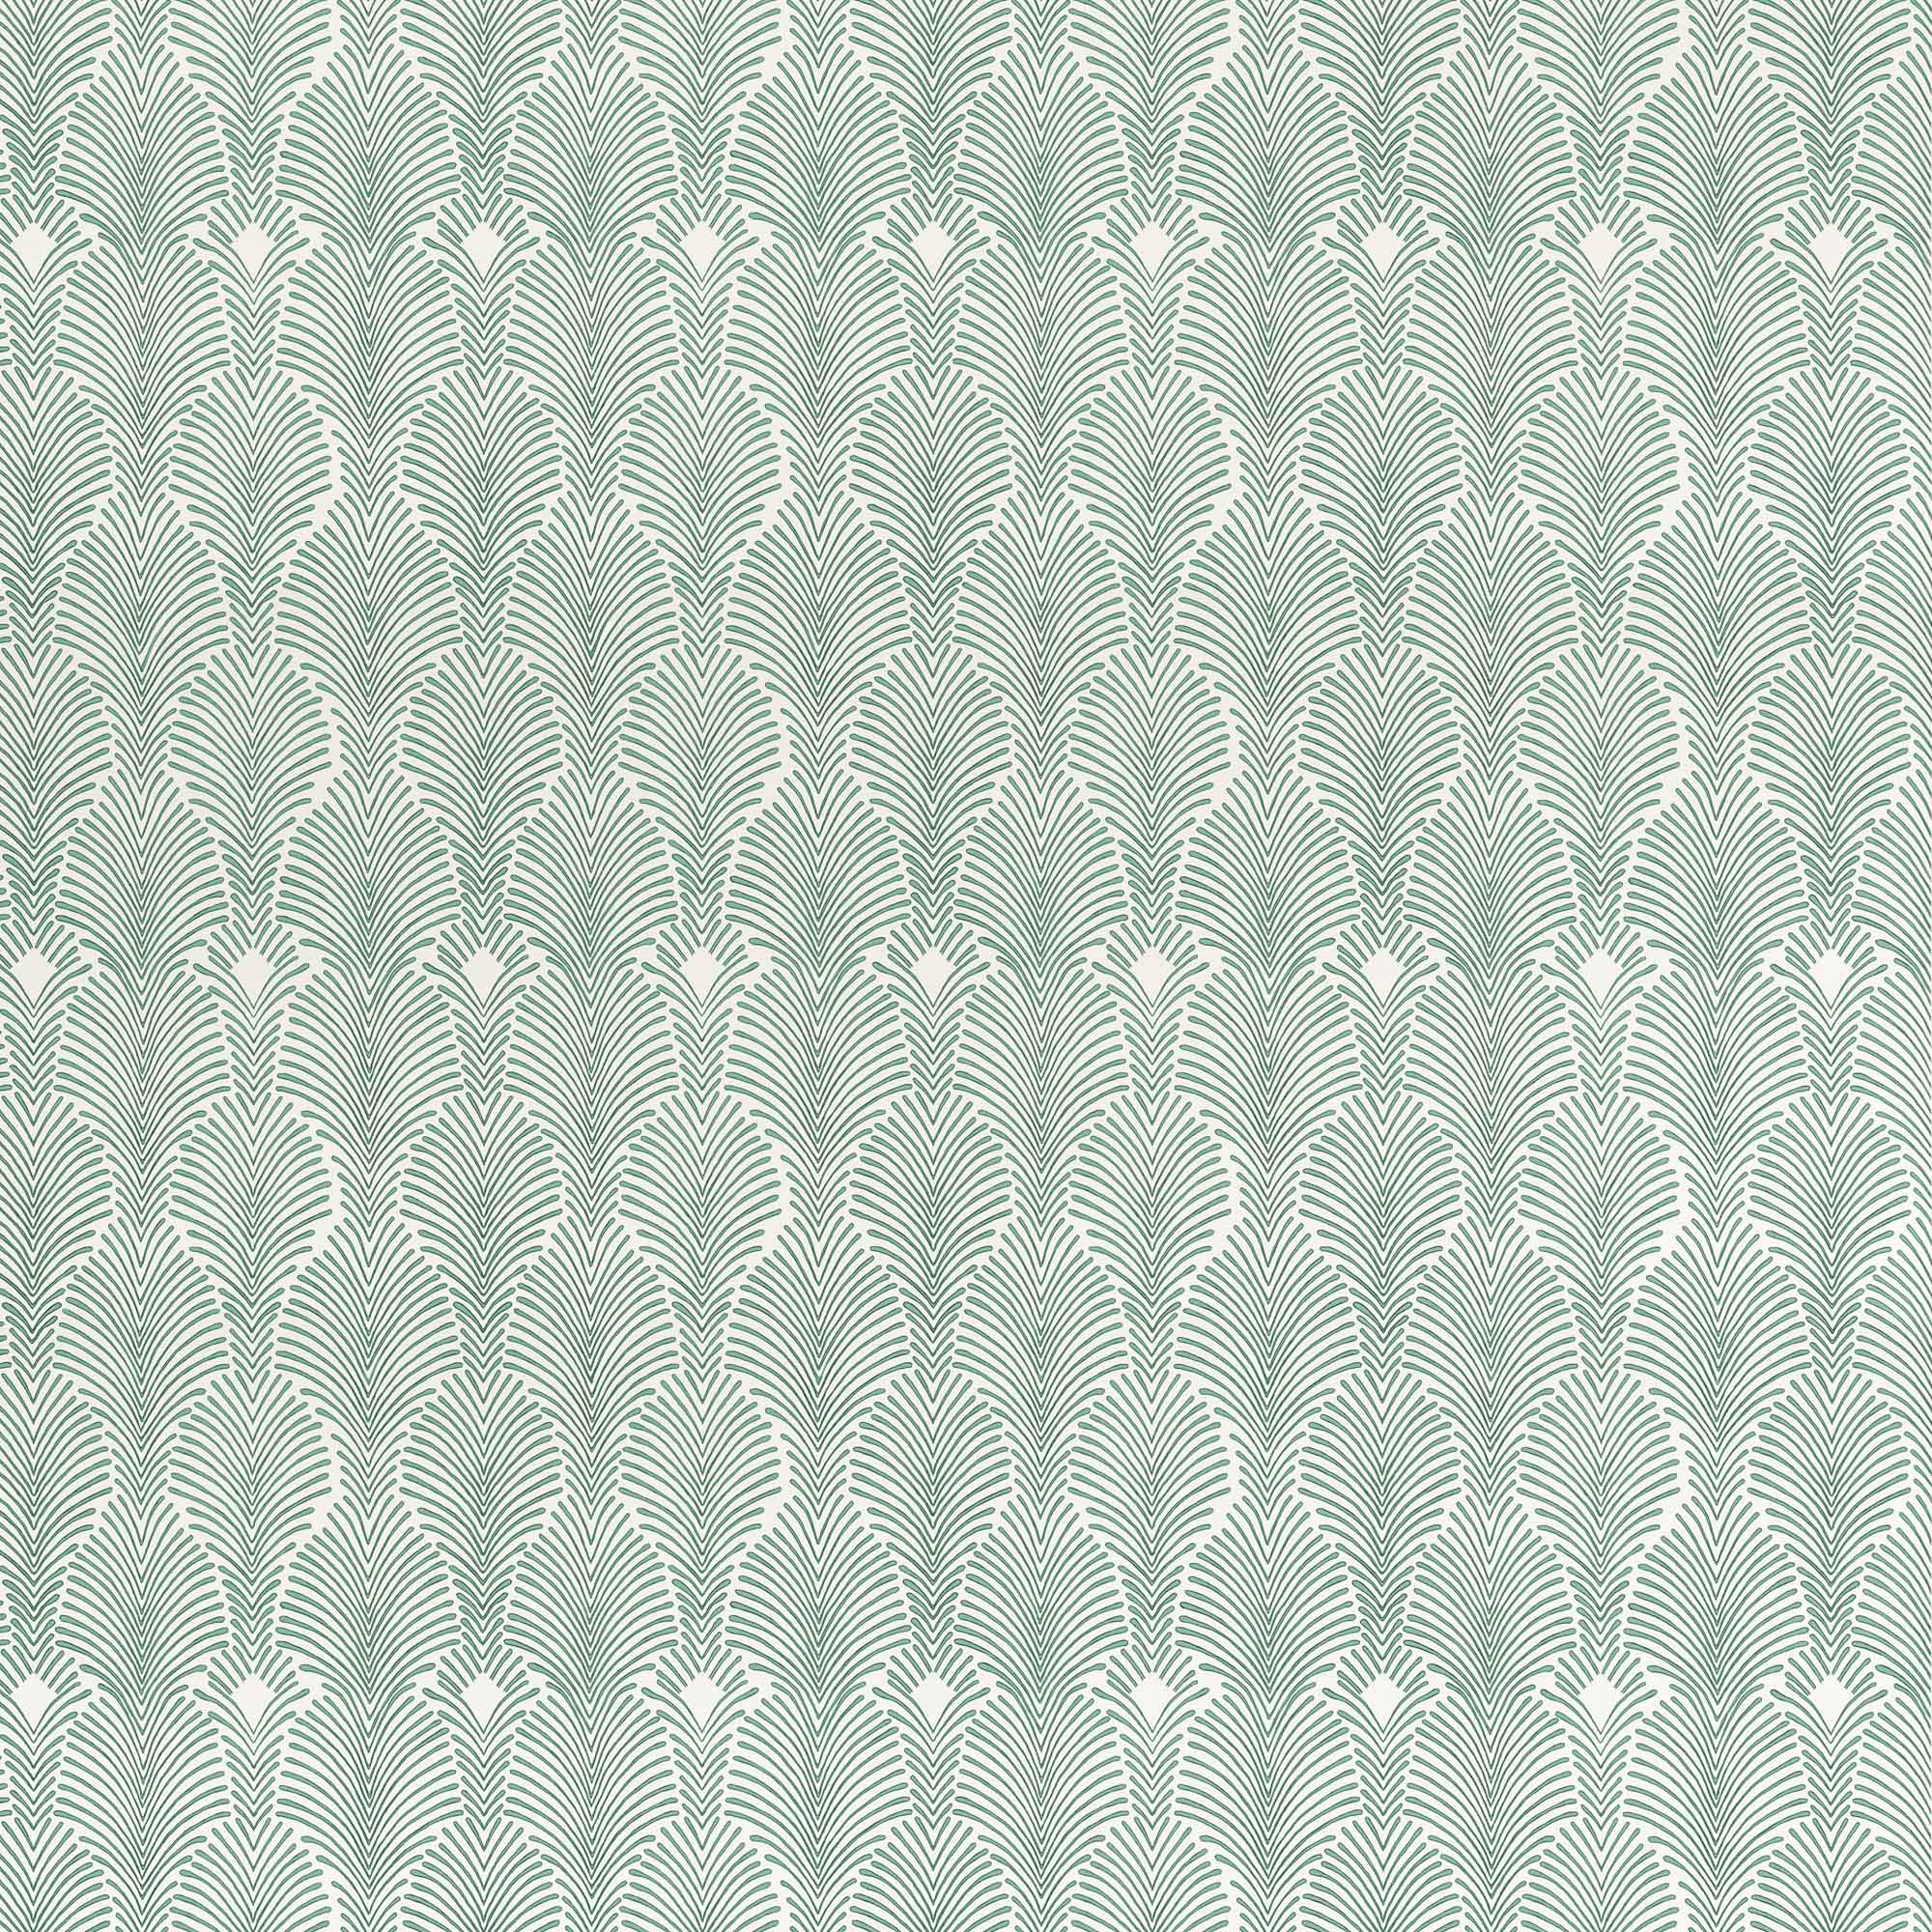 Detail of fabric in a striped damask pattern in green on a cream field.